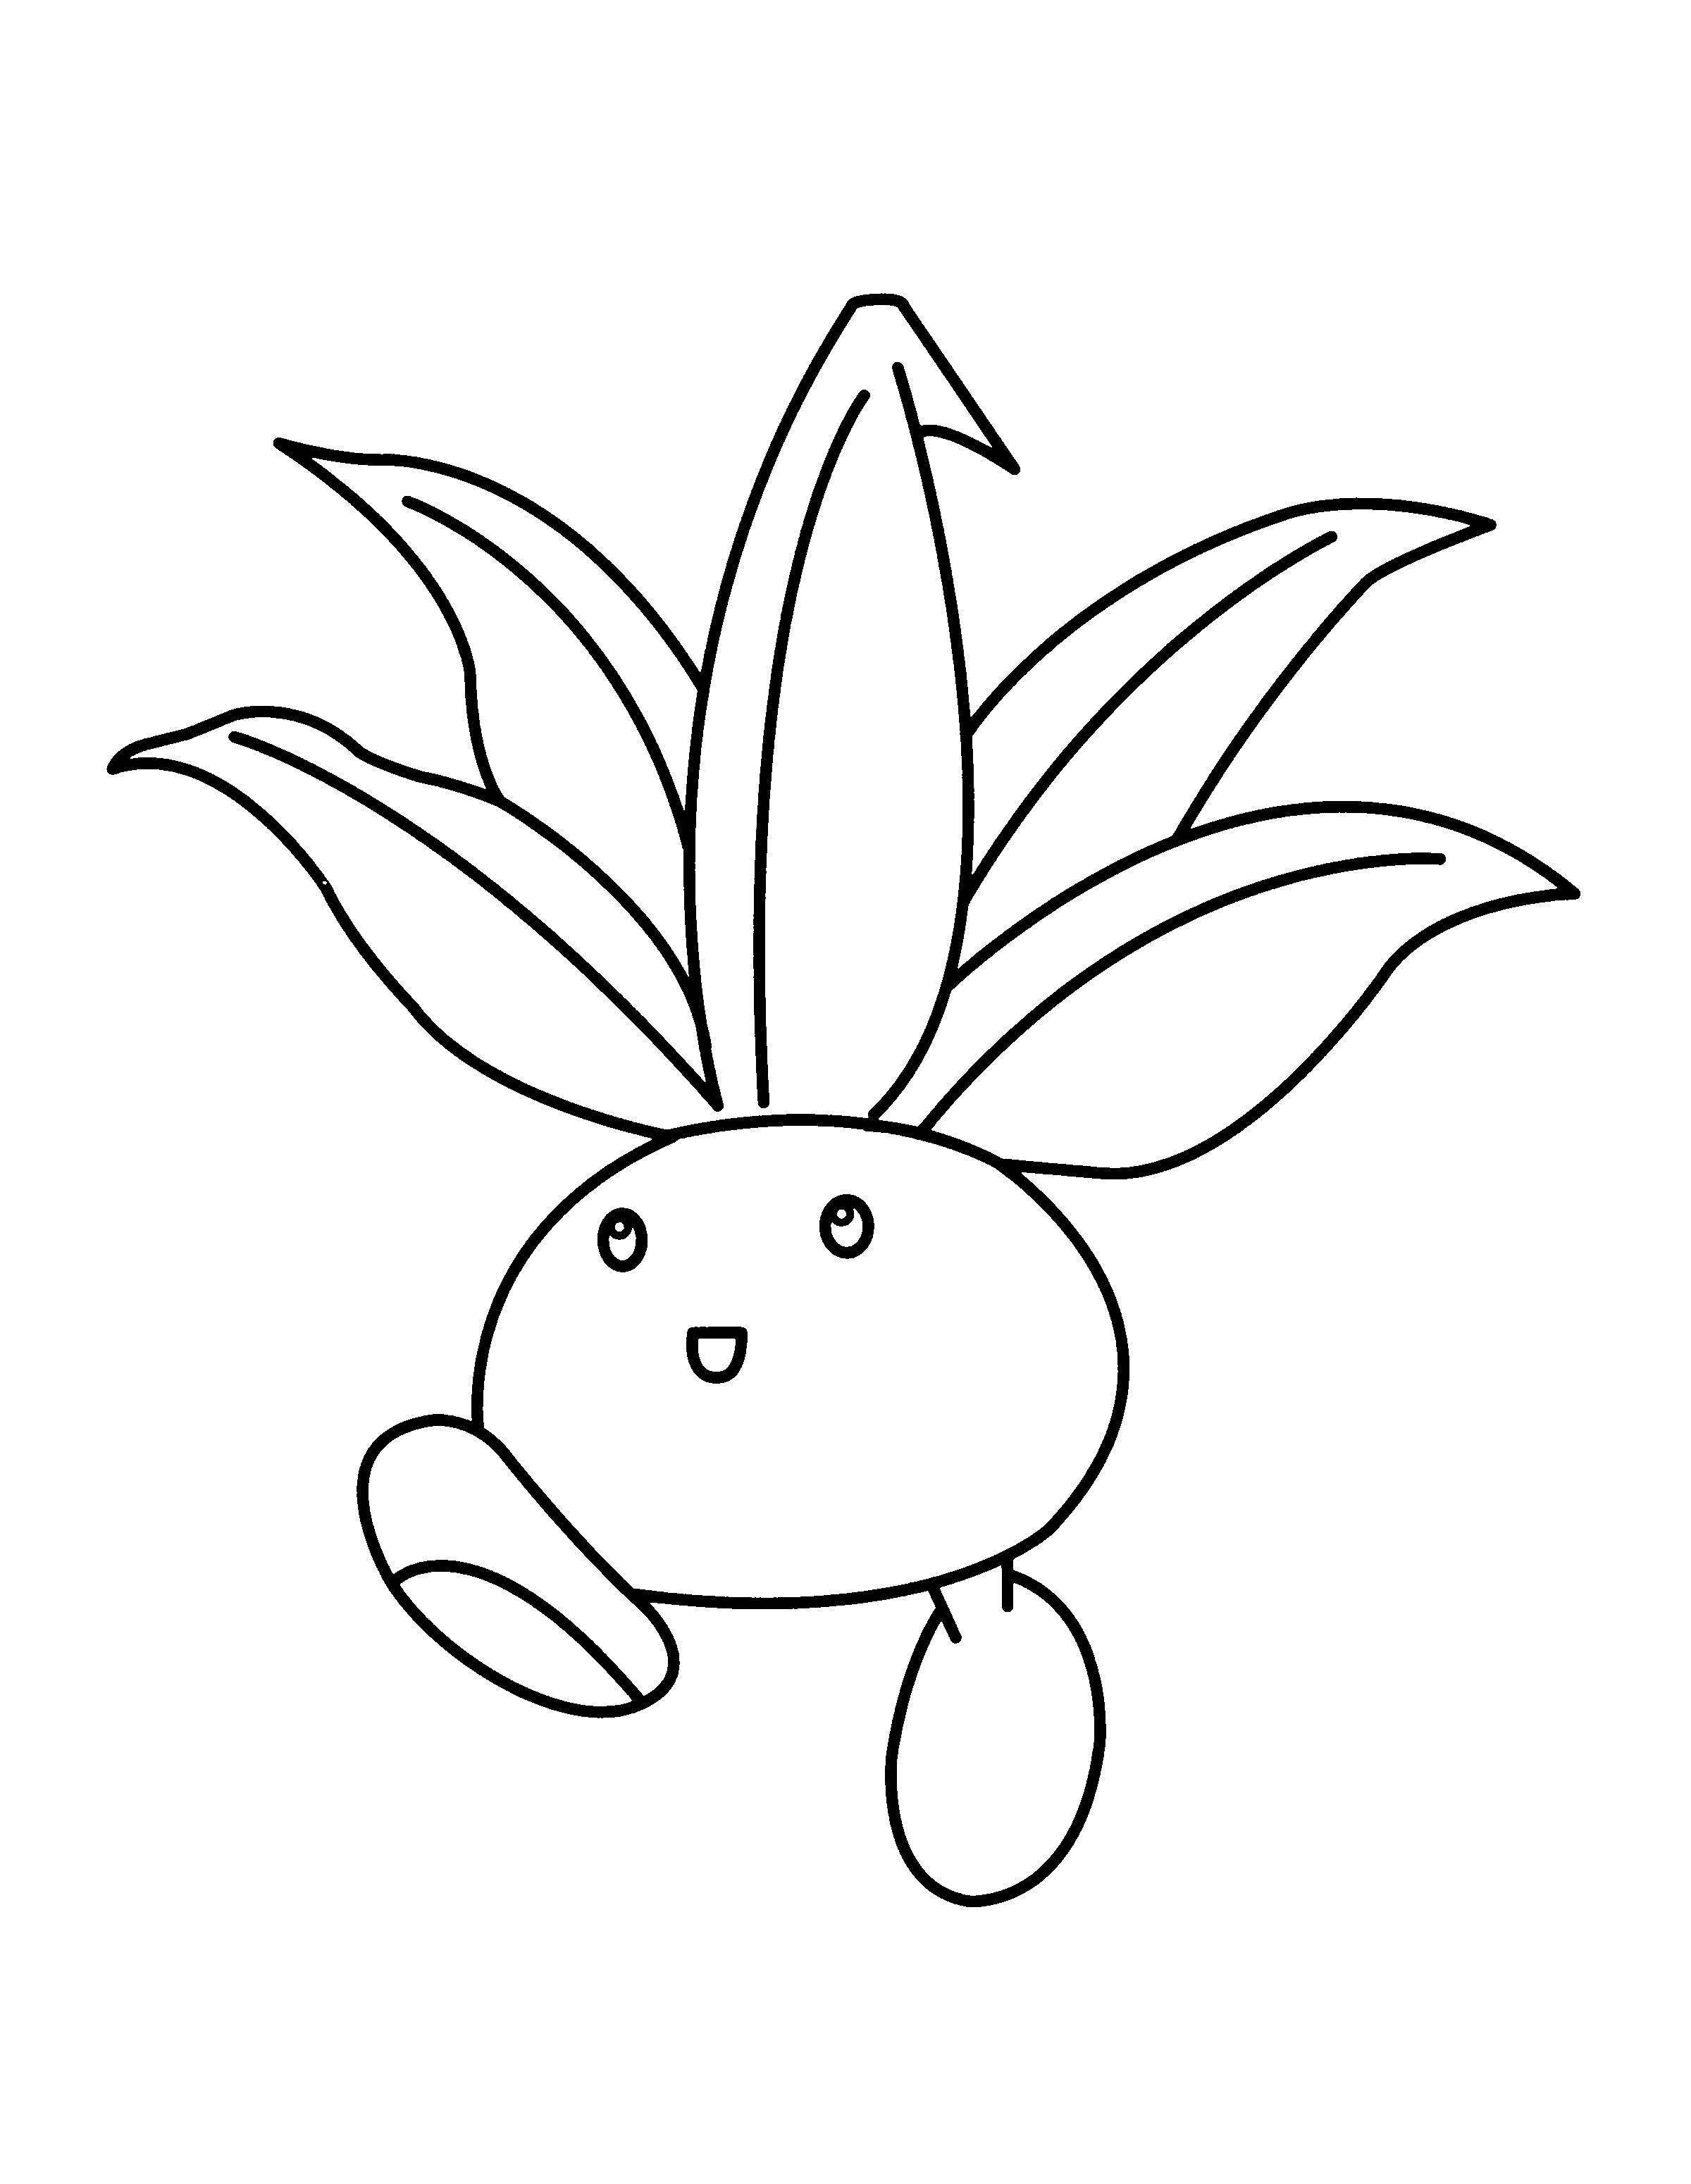 animated-coloring-pages-pokemon-image-0738